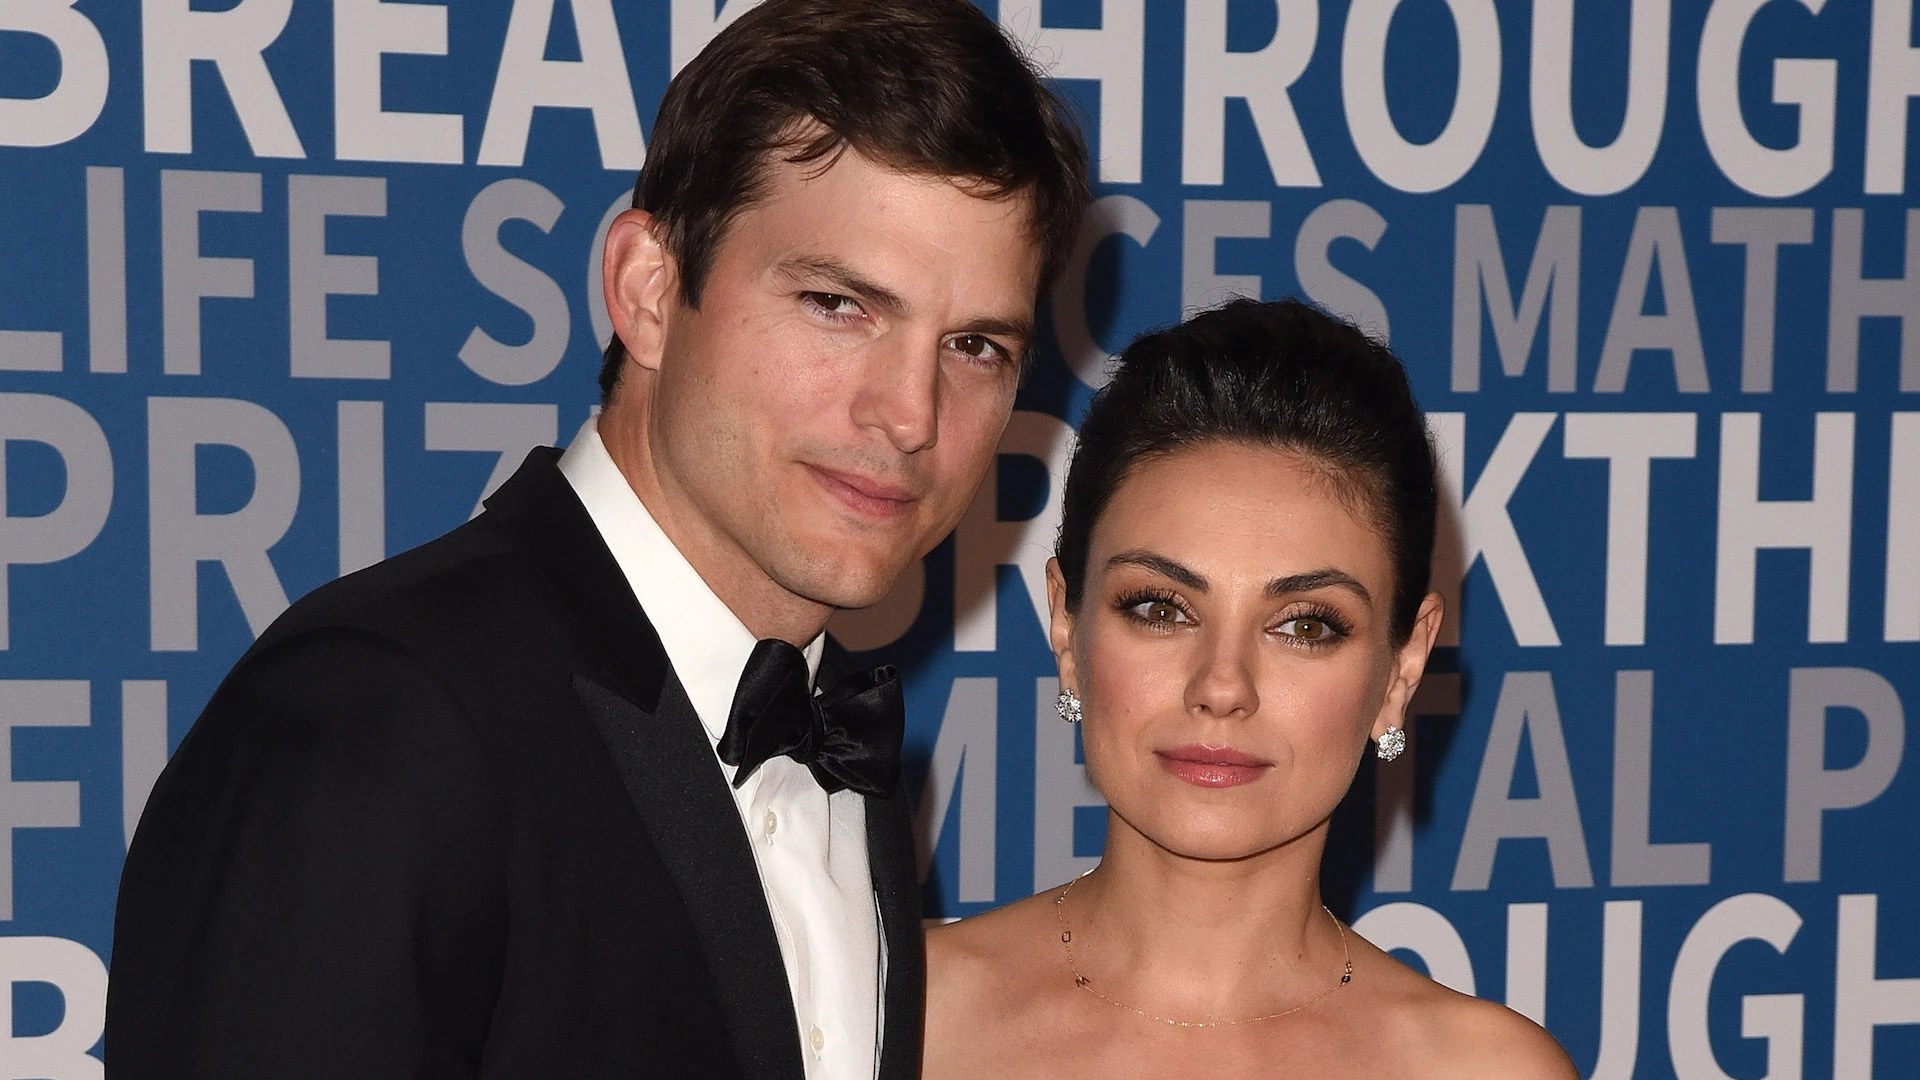 Ashton Kutcher and Mila Kunis: The couple tied the knot in a private ceremony in July 2015. 1920x1080 Full HD Background.